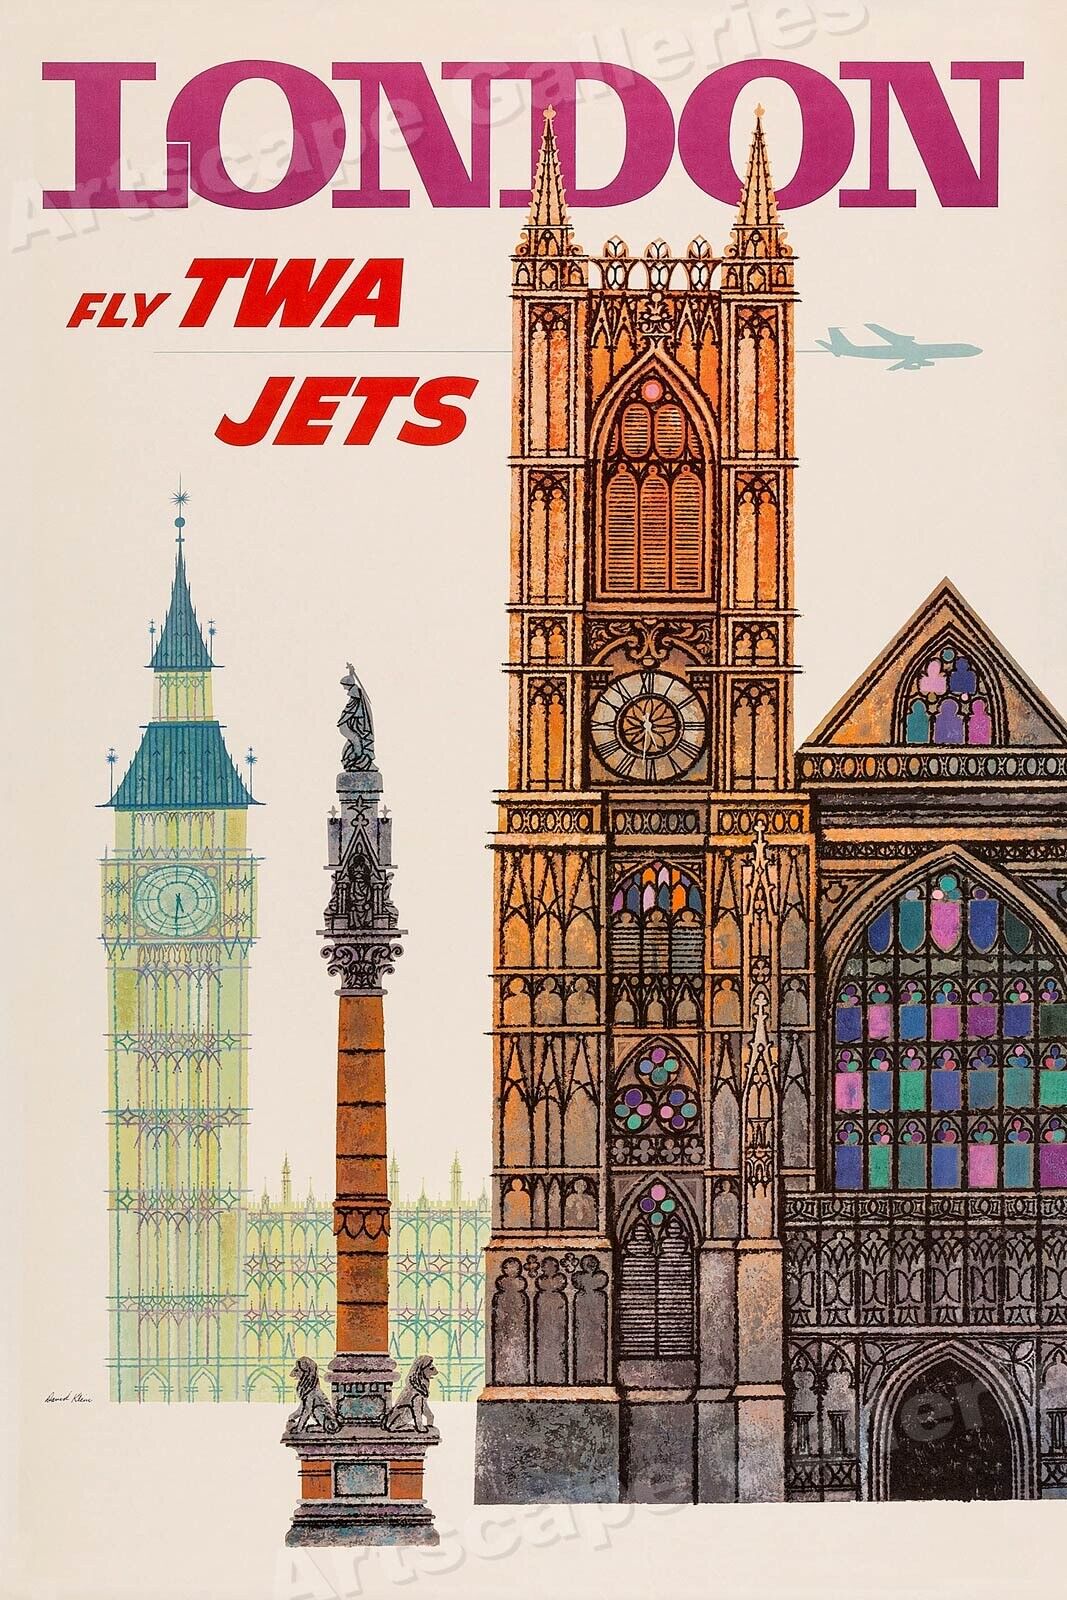 1960s “London” Fly TWAVintage Style Airline Travel Poster - 16x24